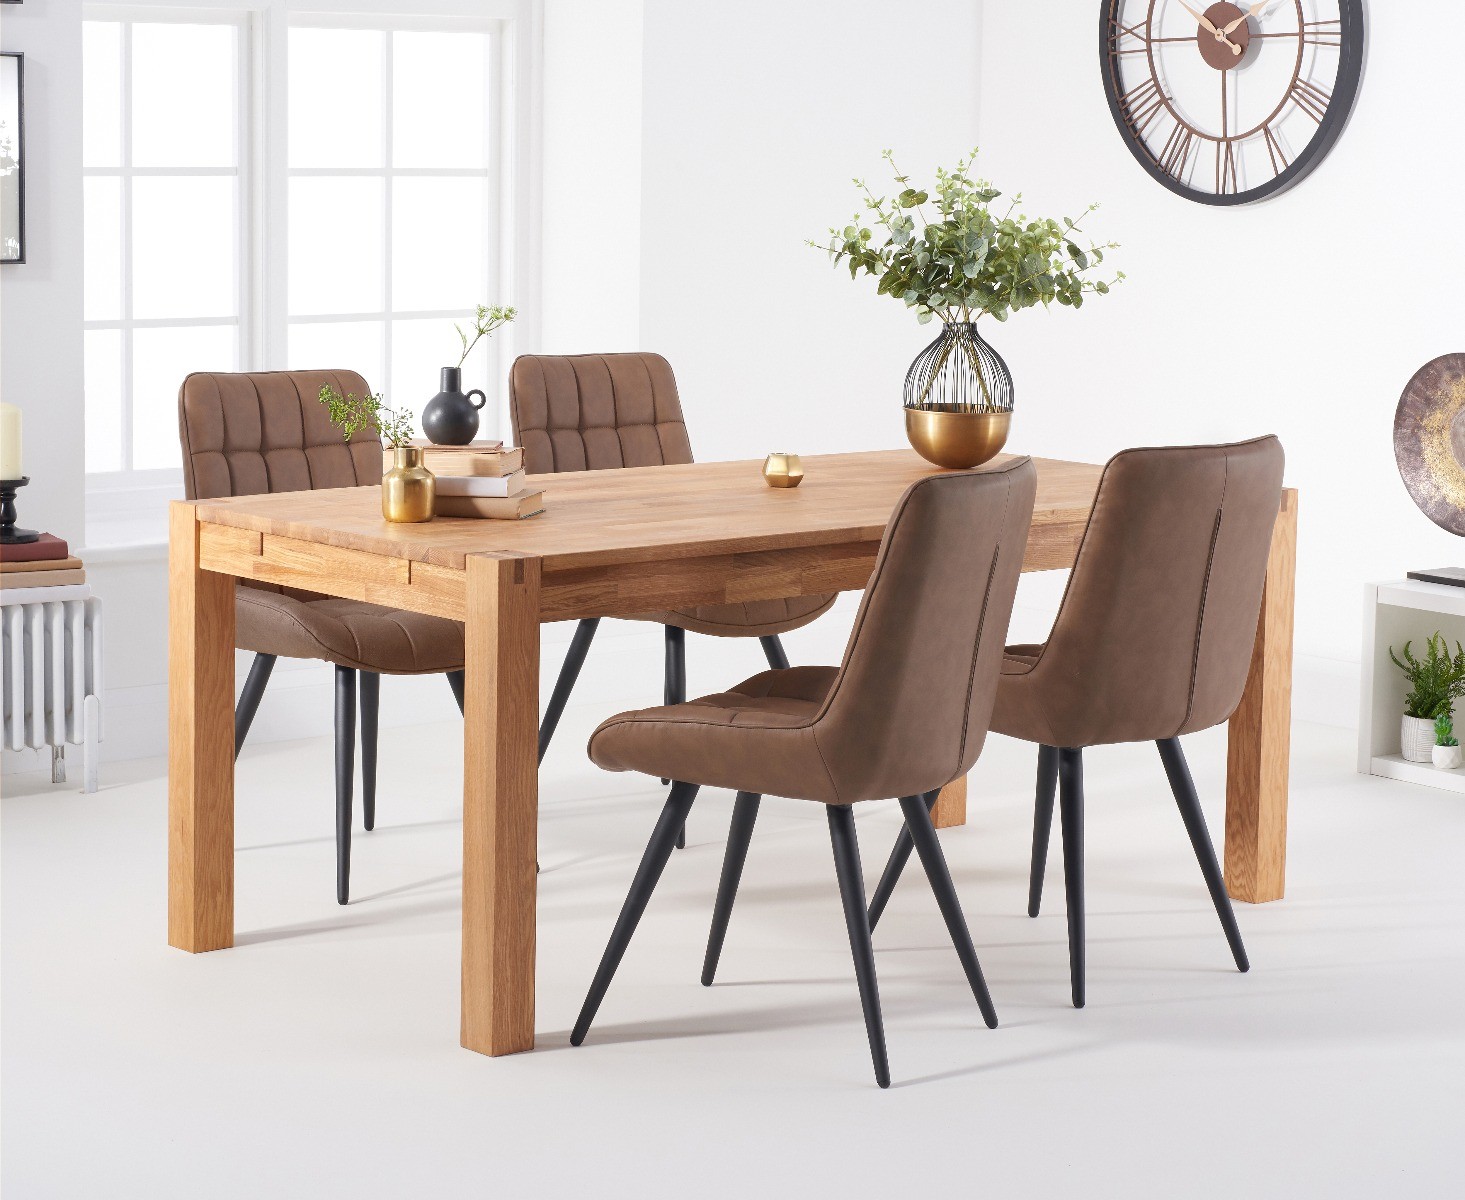 Thetford 180cm Oak Dining Table With 6 Brown Larson Chairs